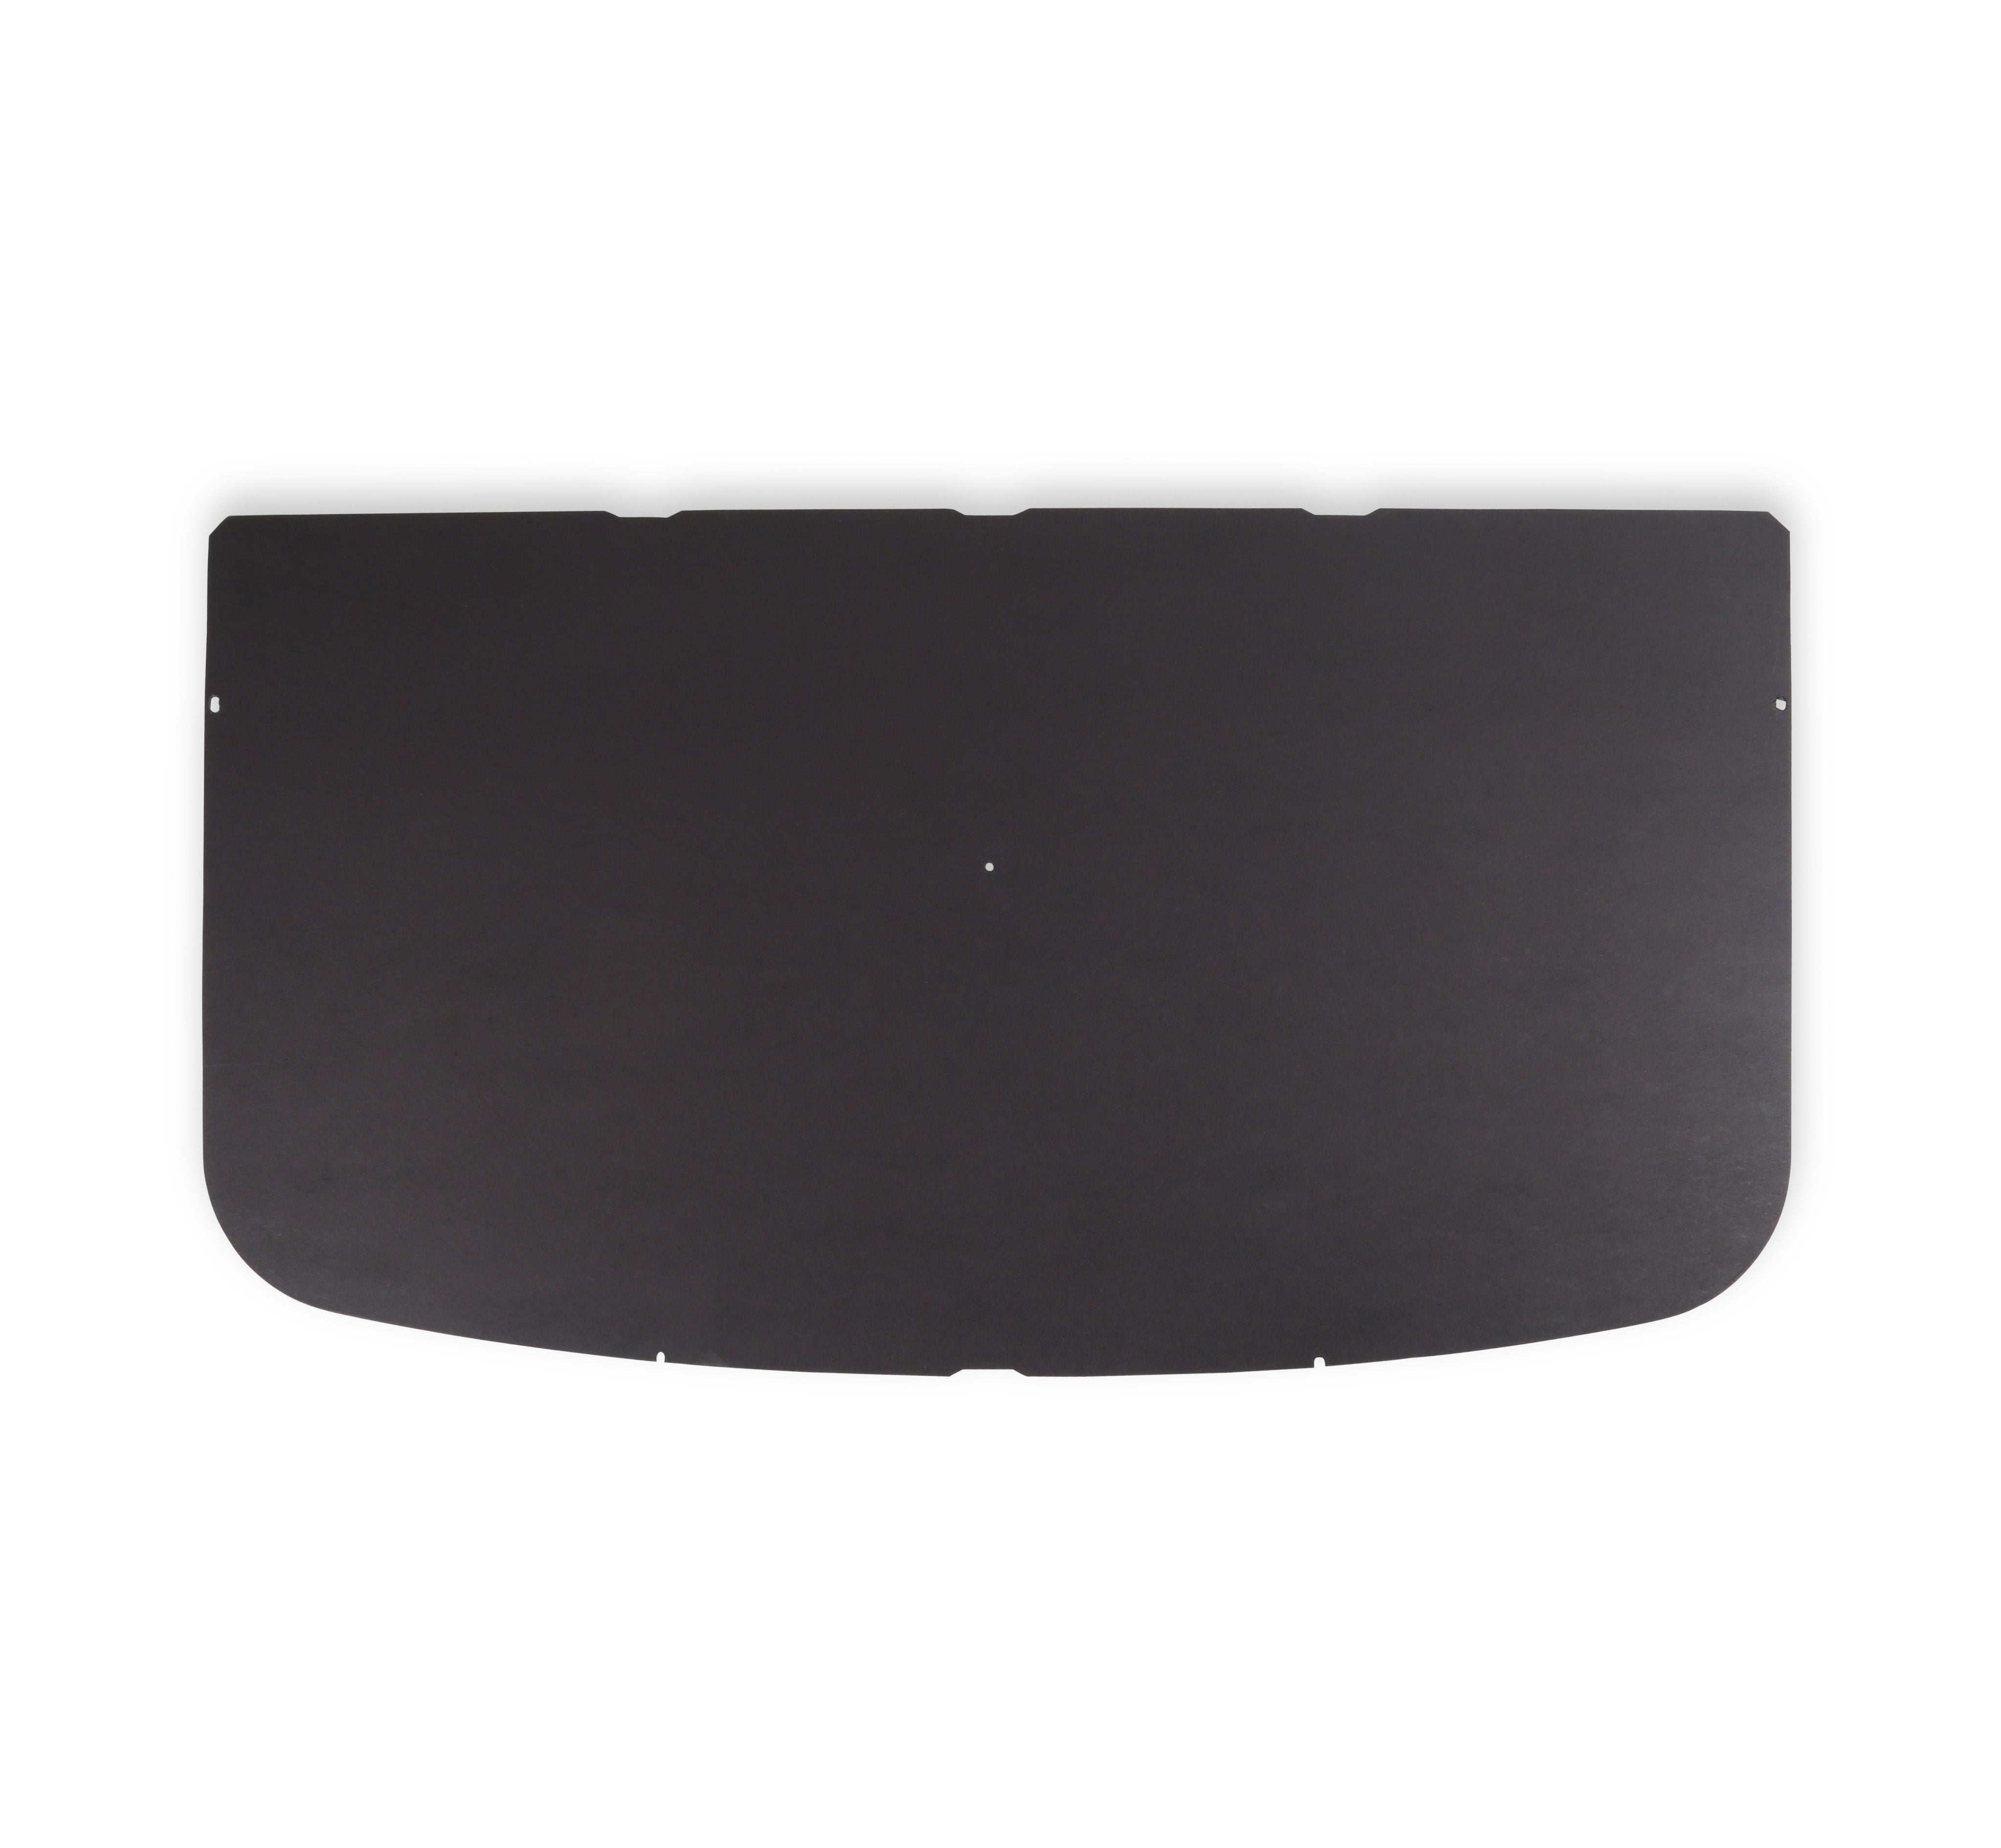 BROTHERS F-Series Pressboard Headliner - Uncovered pn 05-353